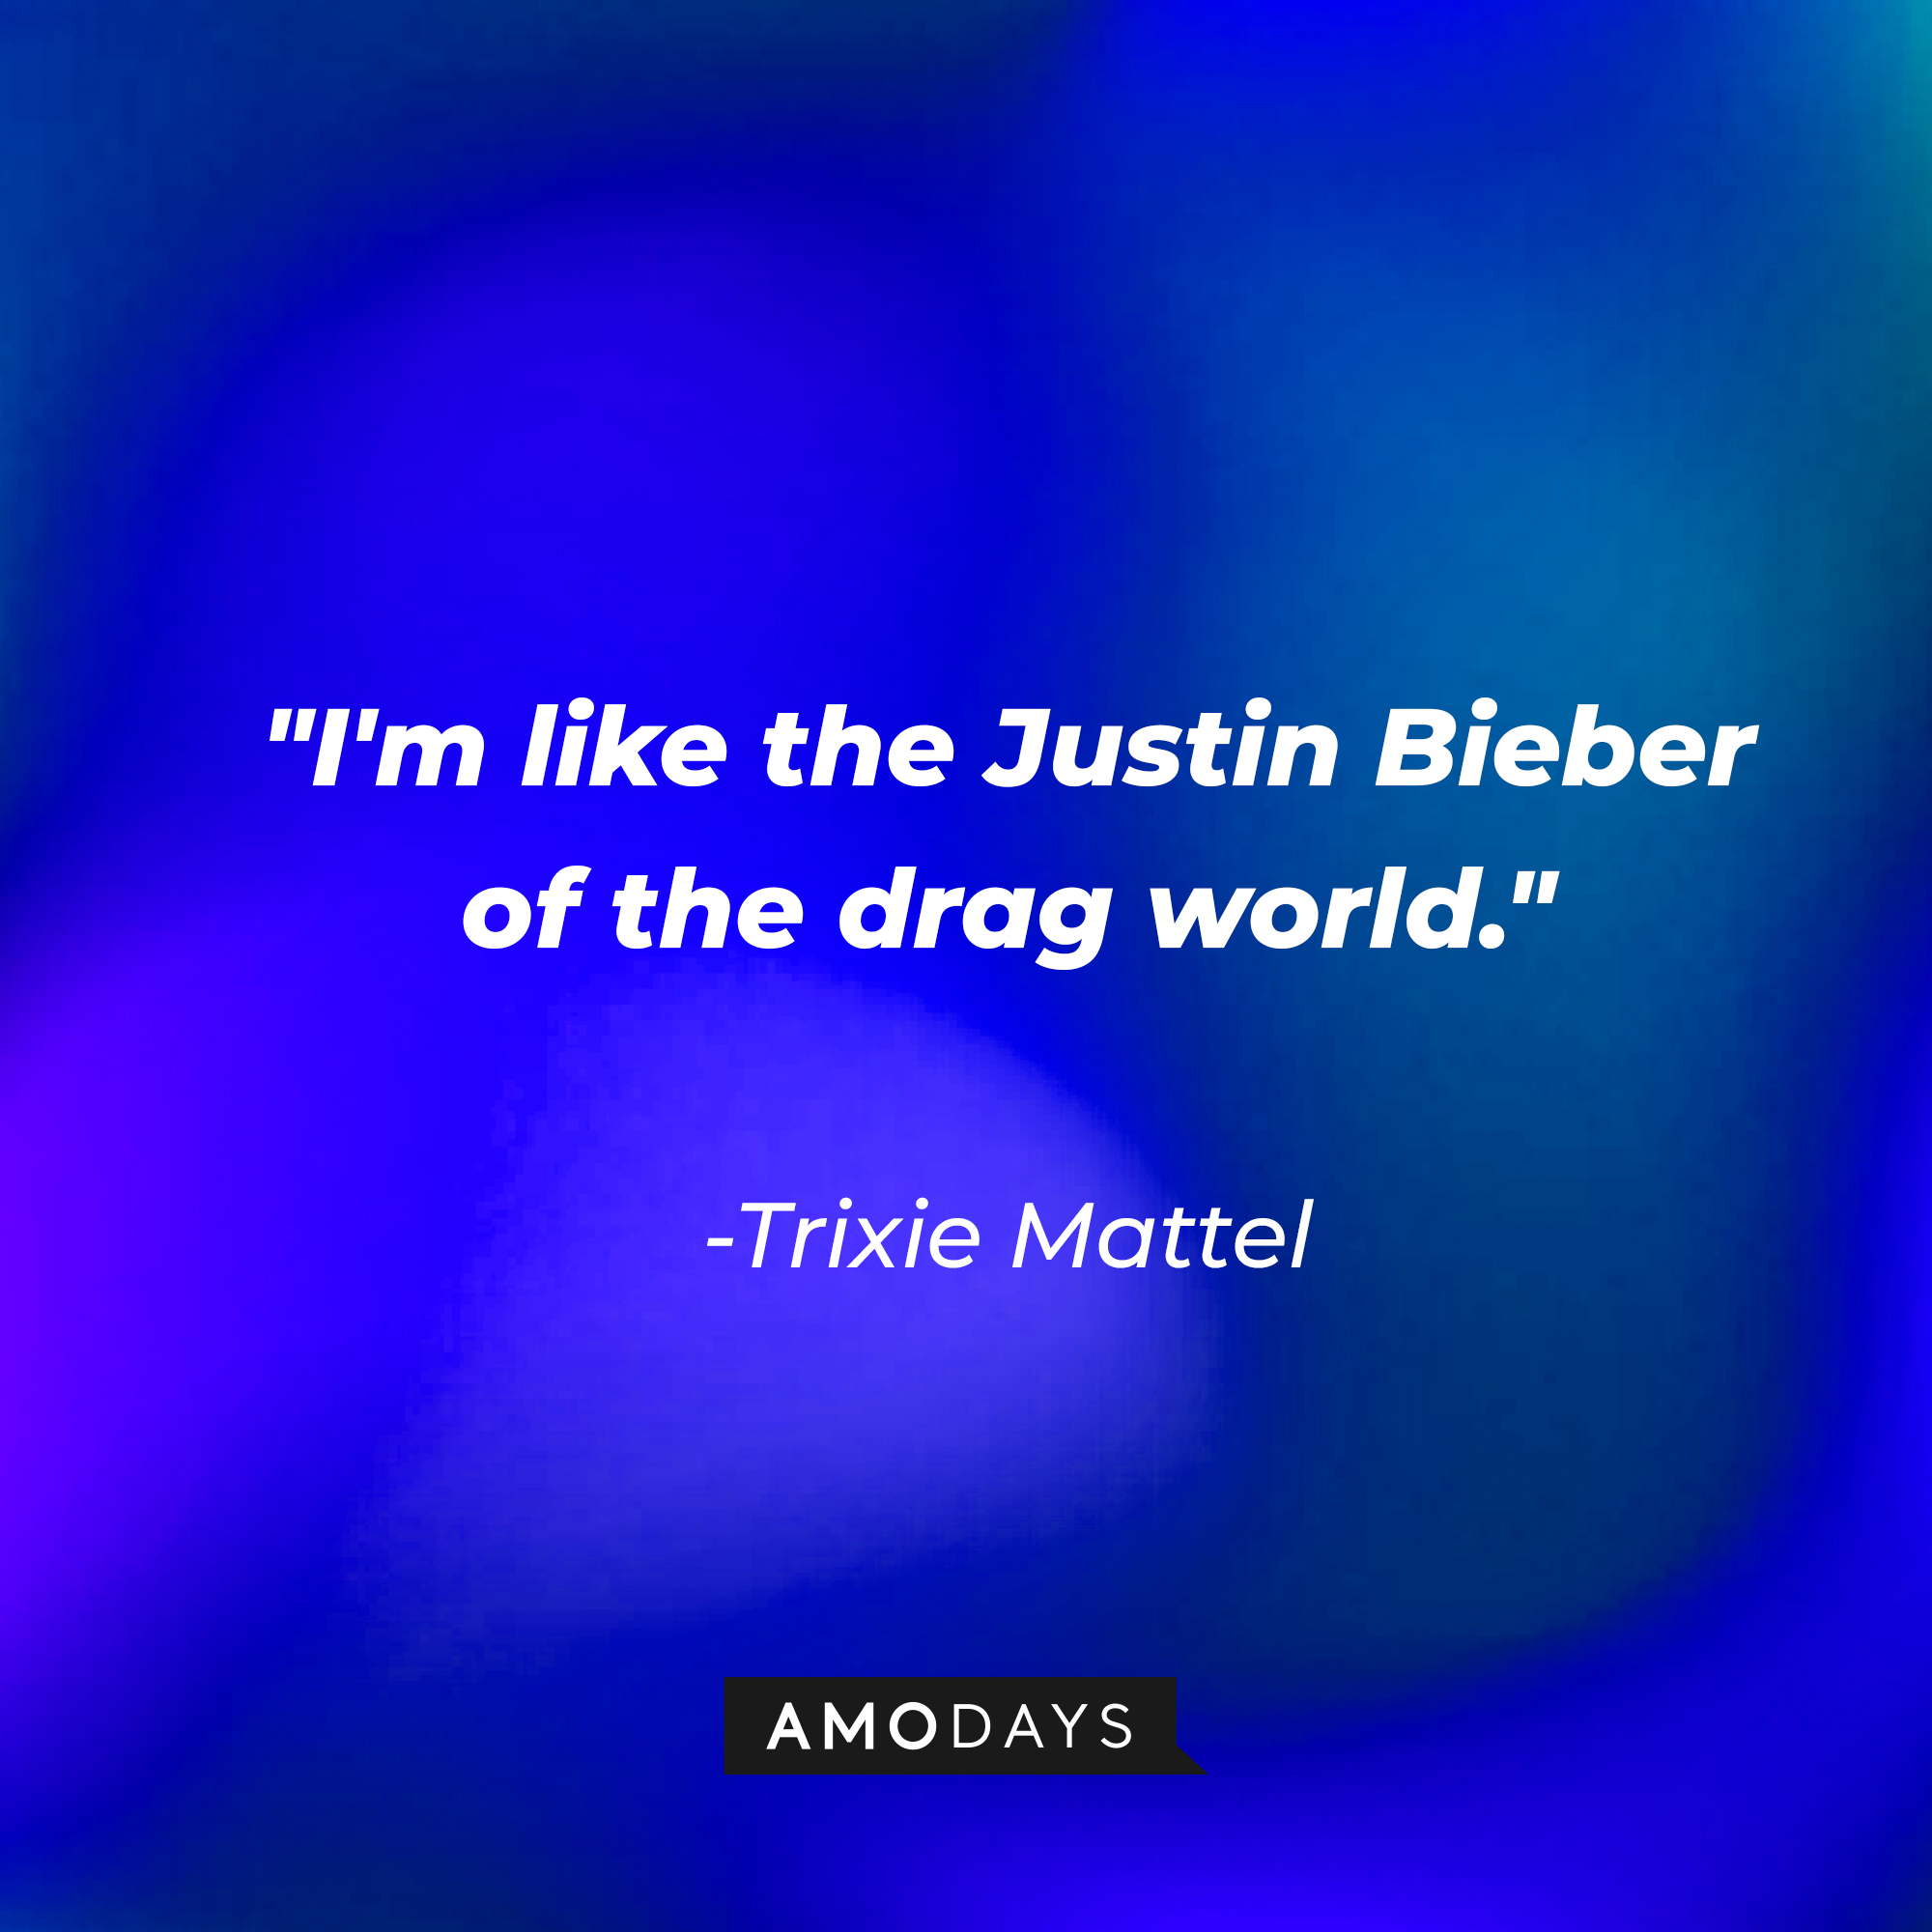 Trixie Mattel's quote: "I'm like the Justin Bieber of the drag world." | Source: AmoDays